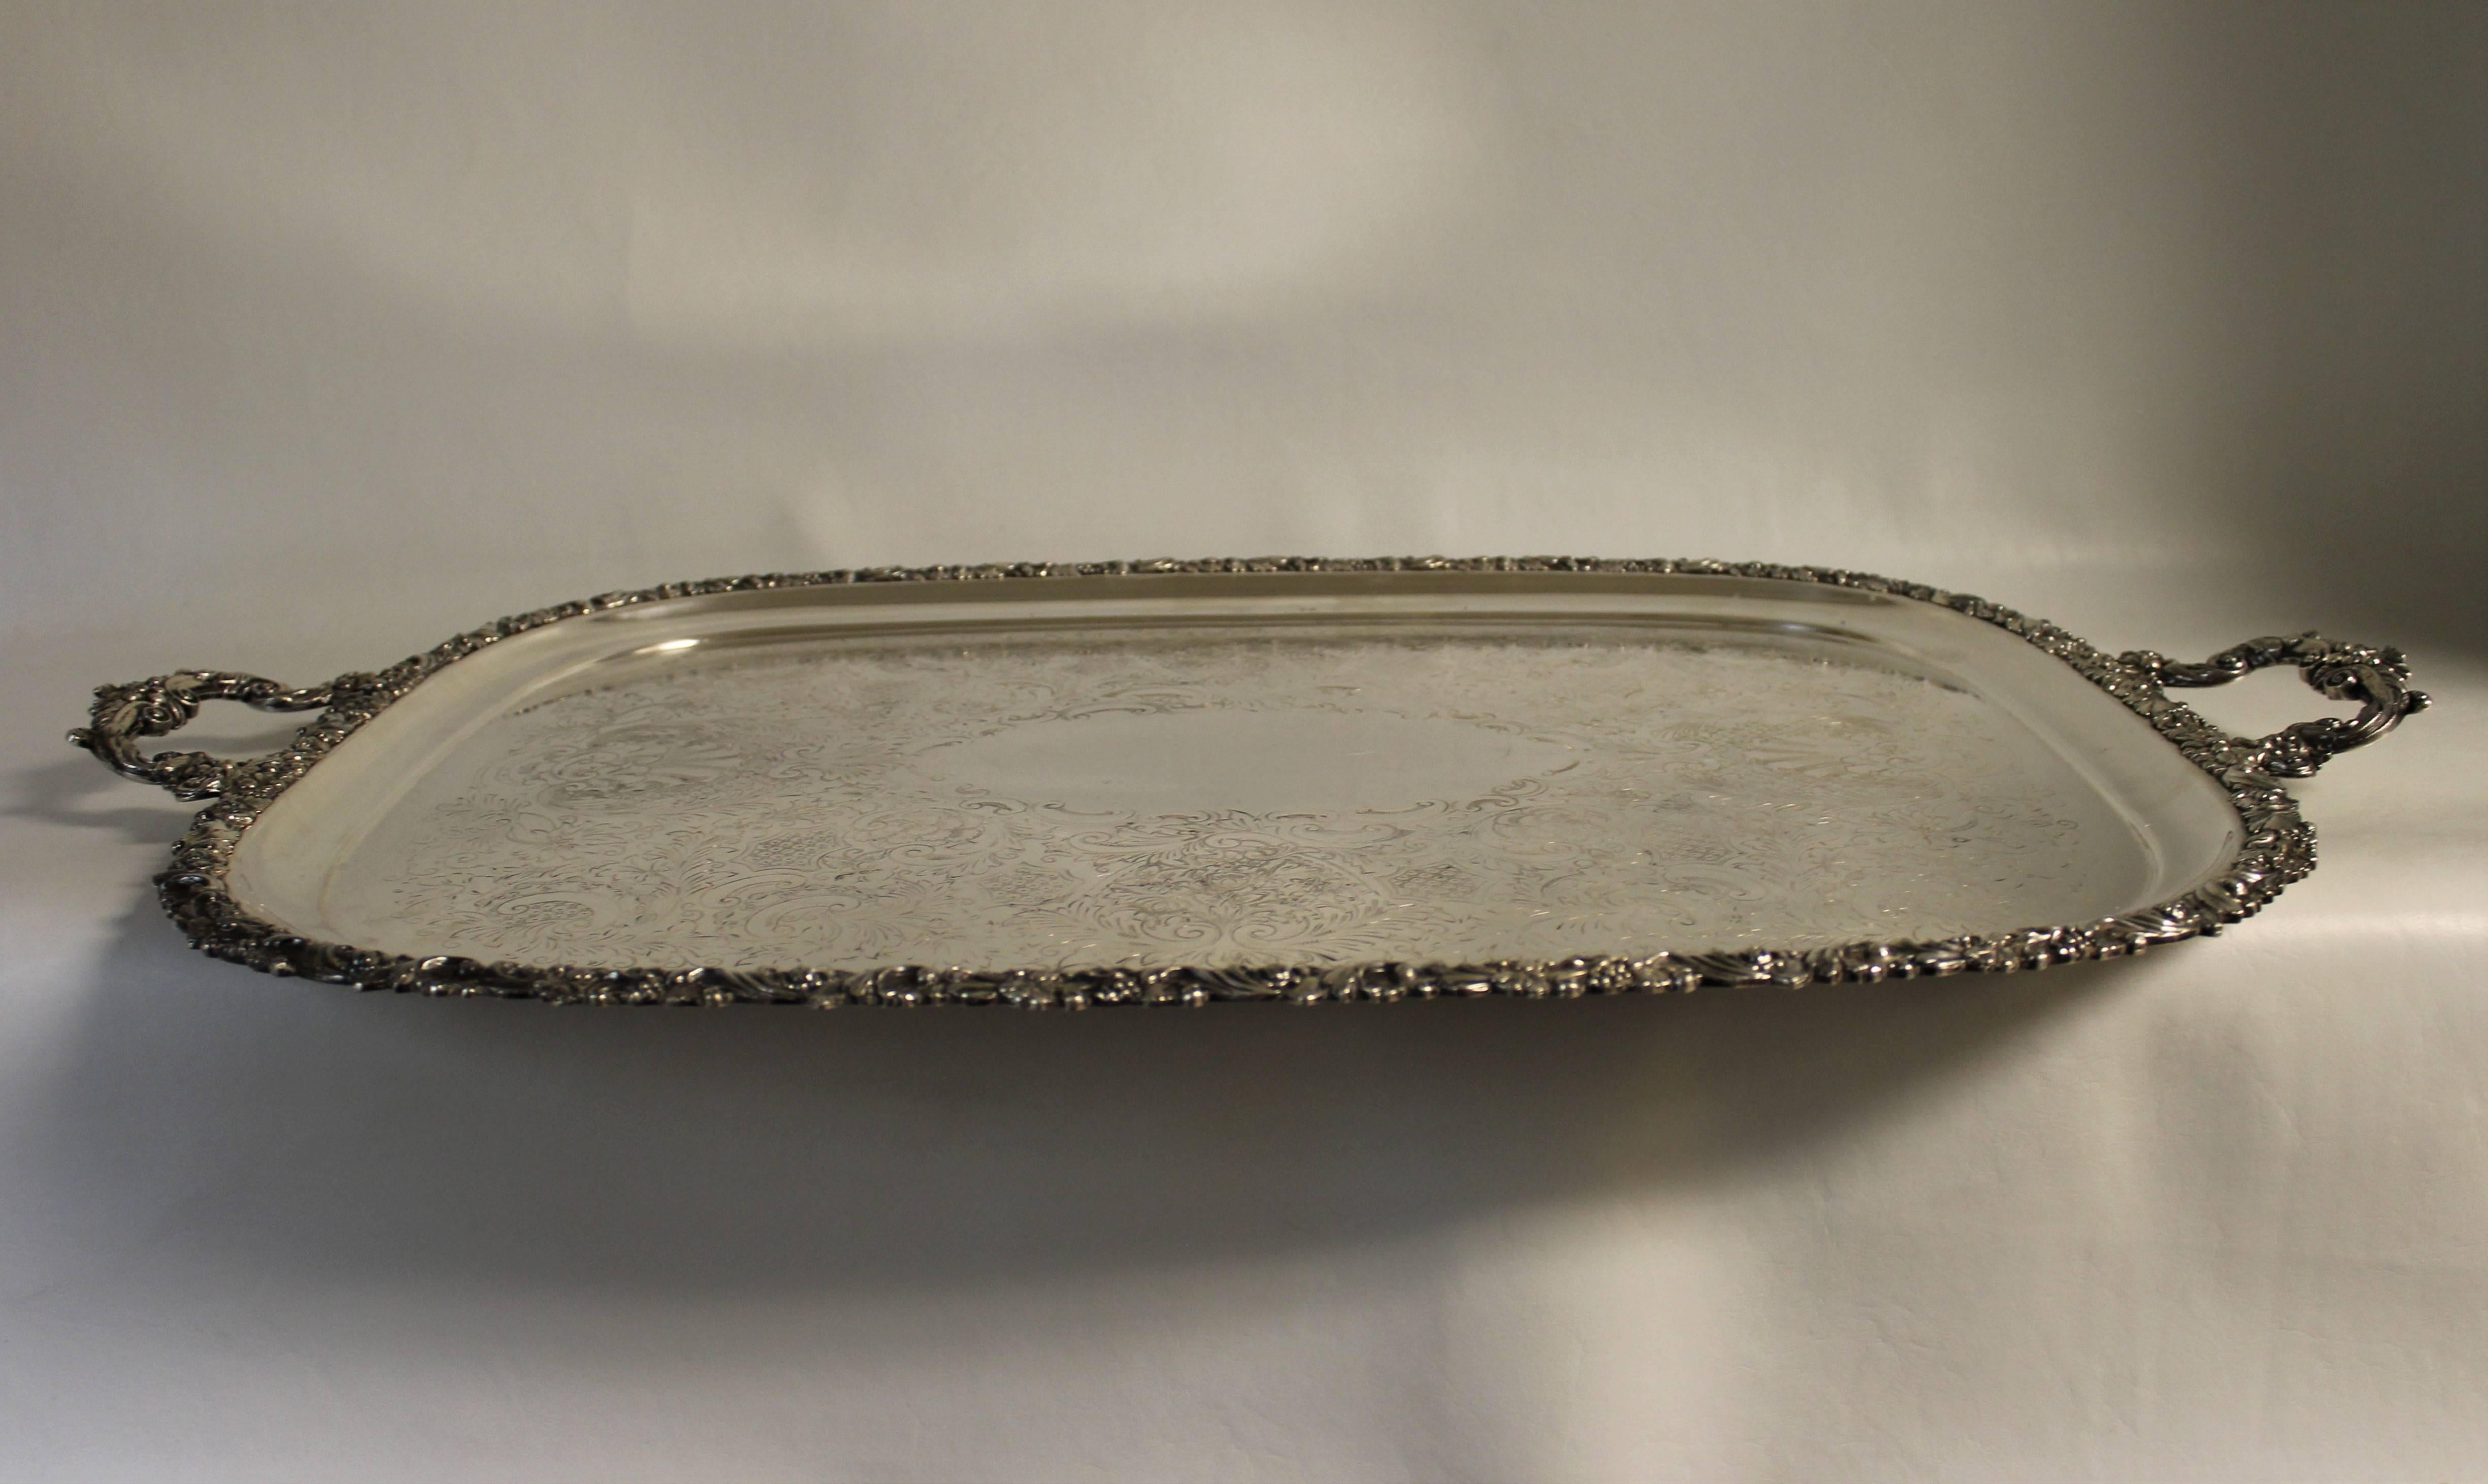 English Ellis-Barker silver plated tray with grapevine motif; reticulated border, chased and engraved surface with scrolling foliate and floral design.